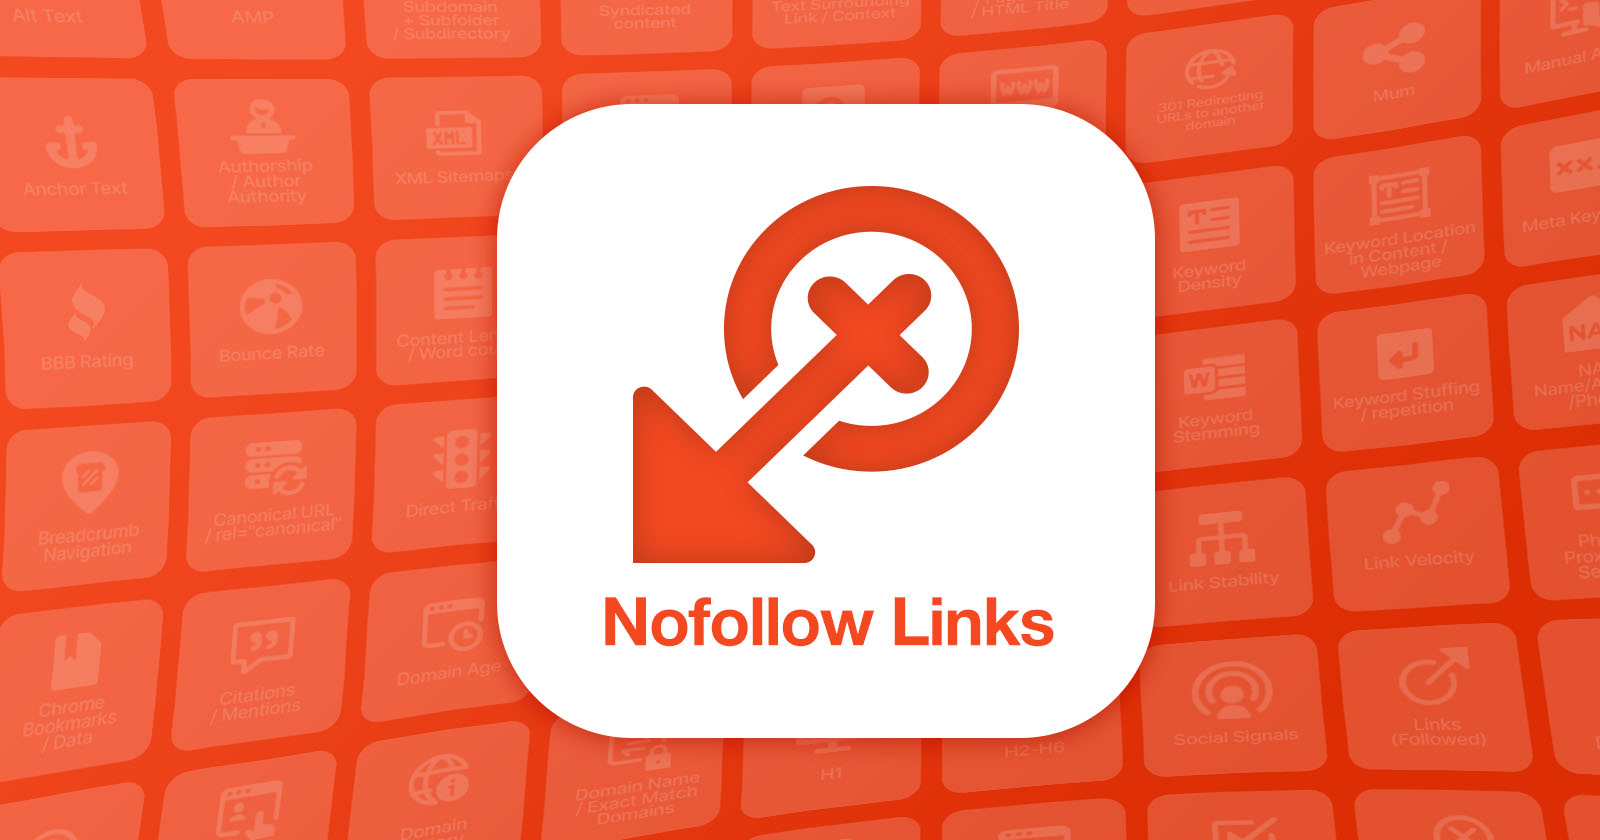 Are Nofollow Hyperlinks A Google Rating Issue?